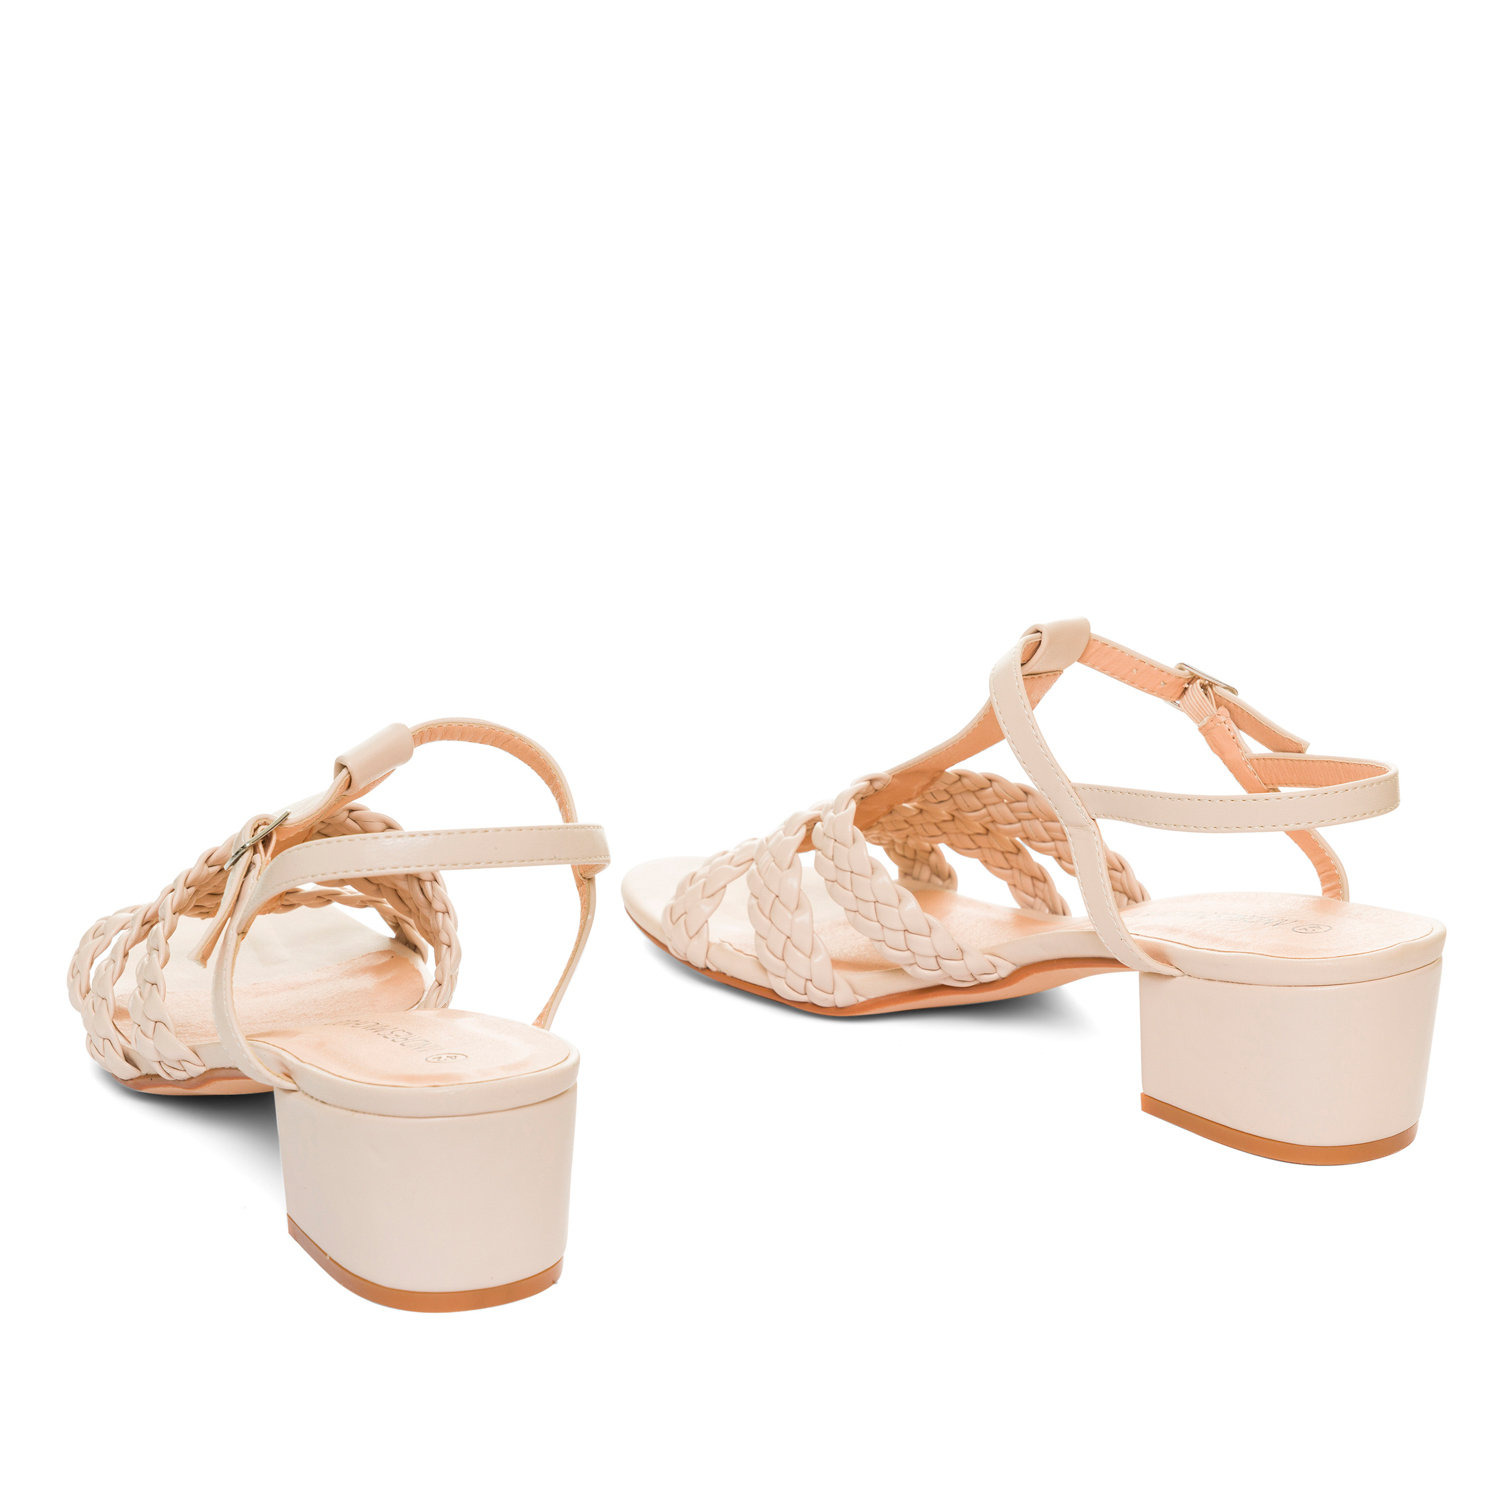 Off-white faux leather sandals 